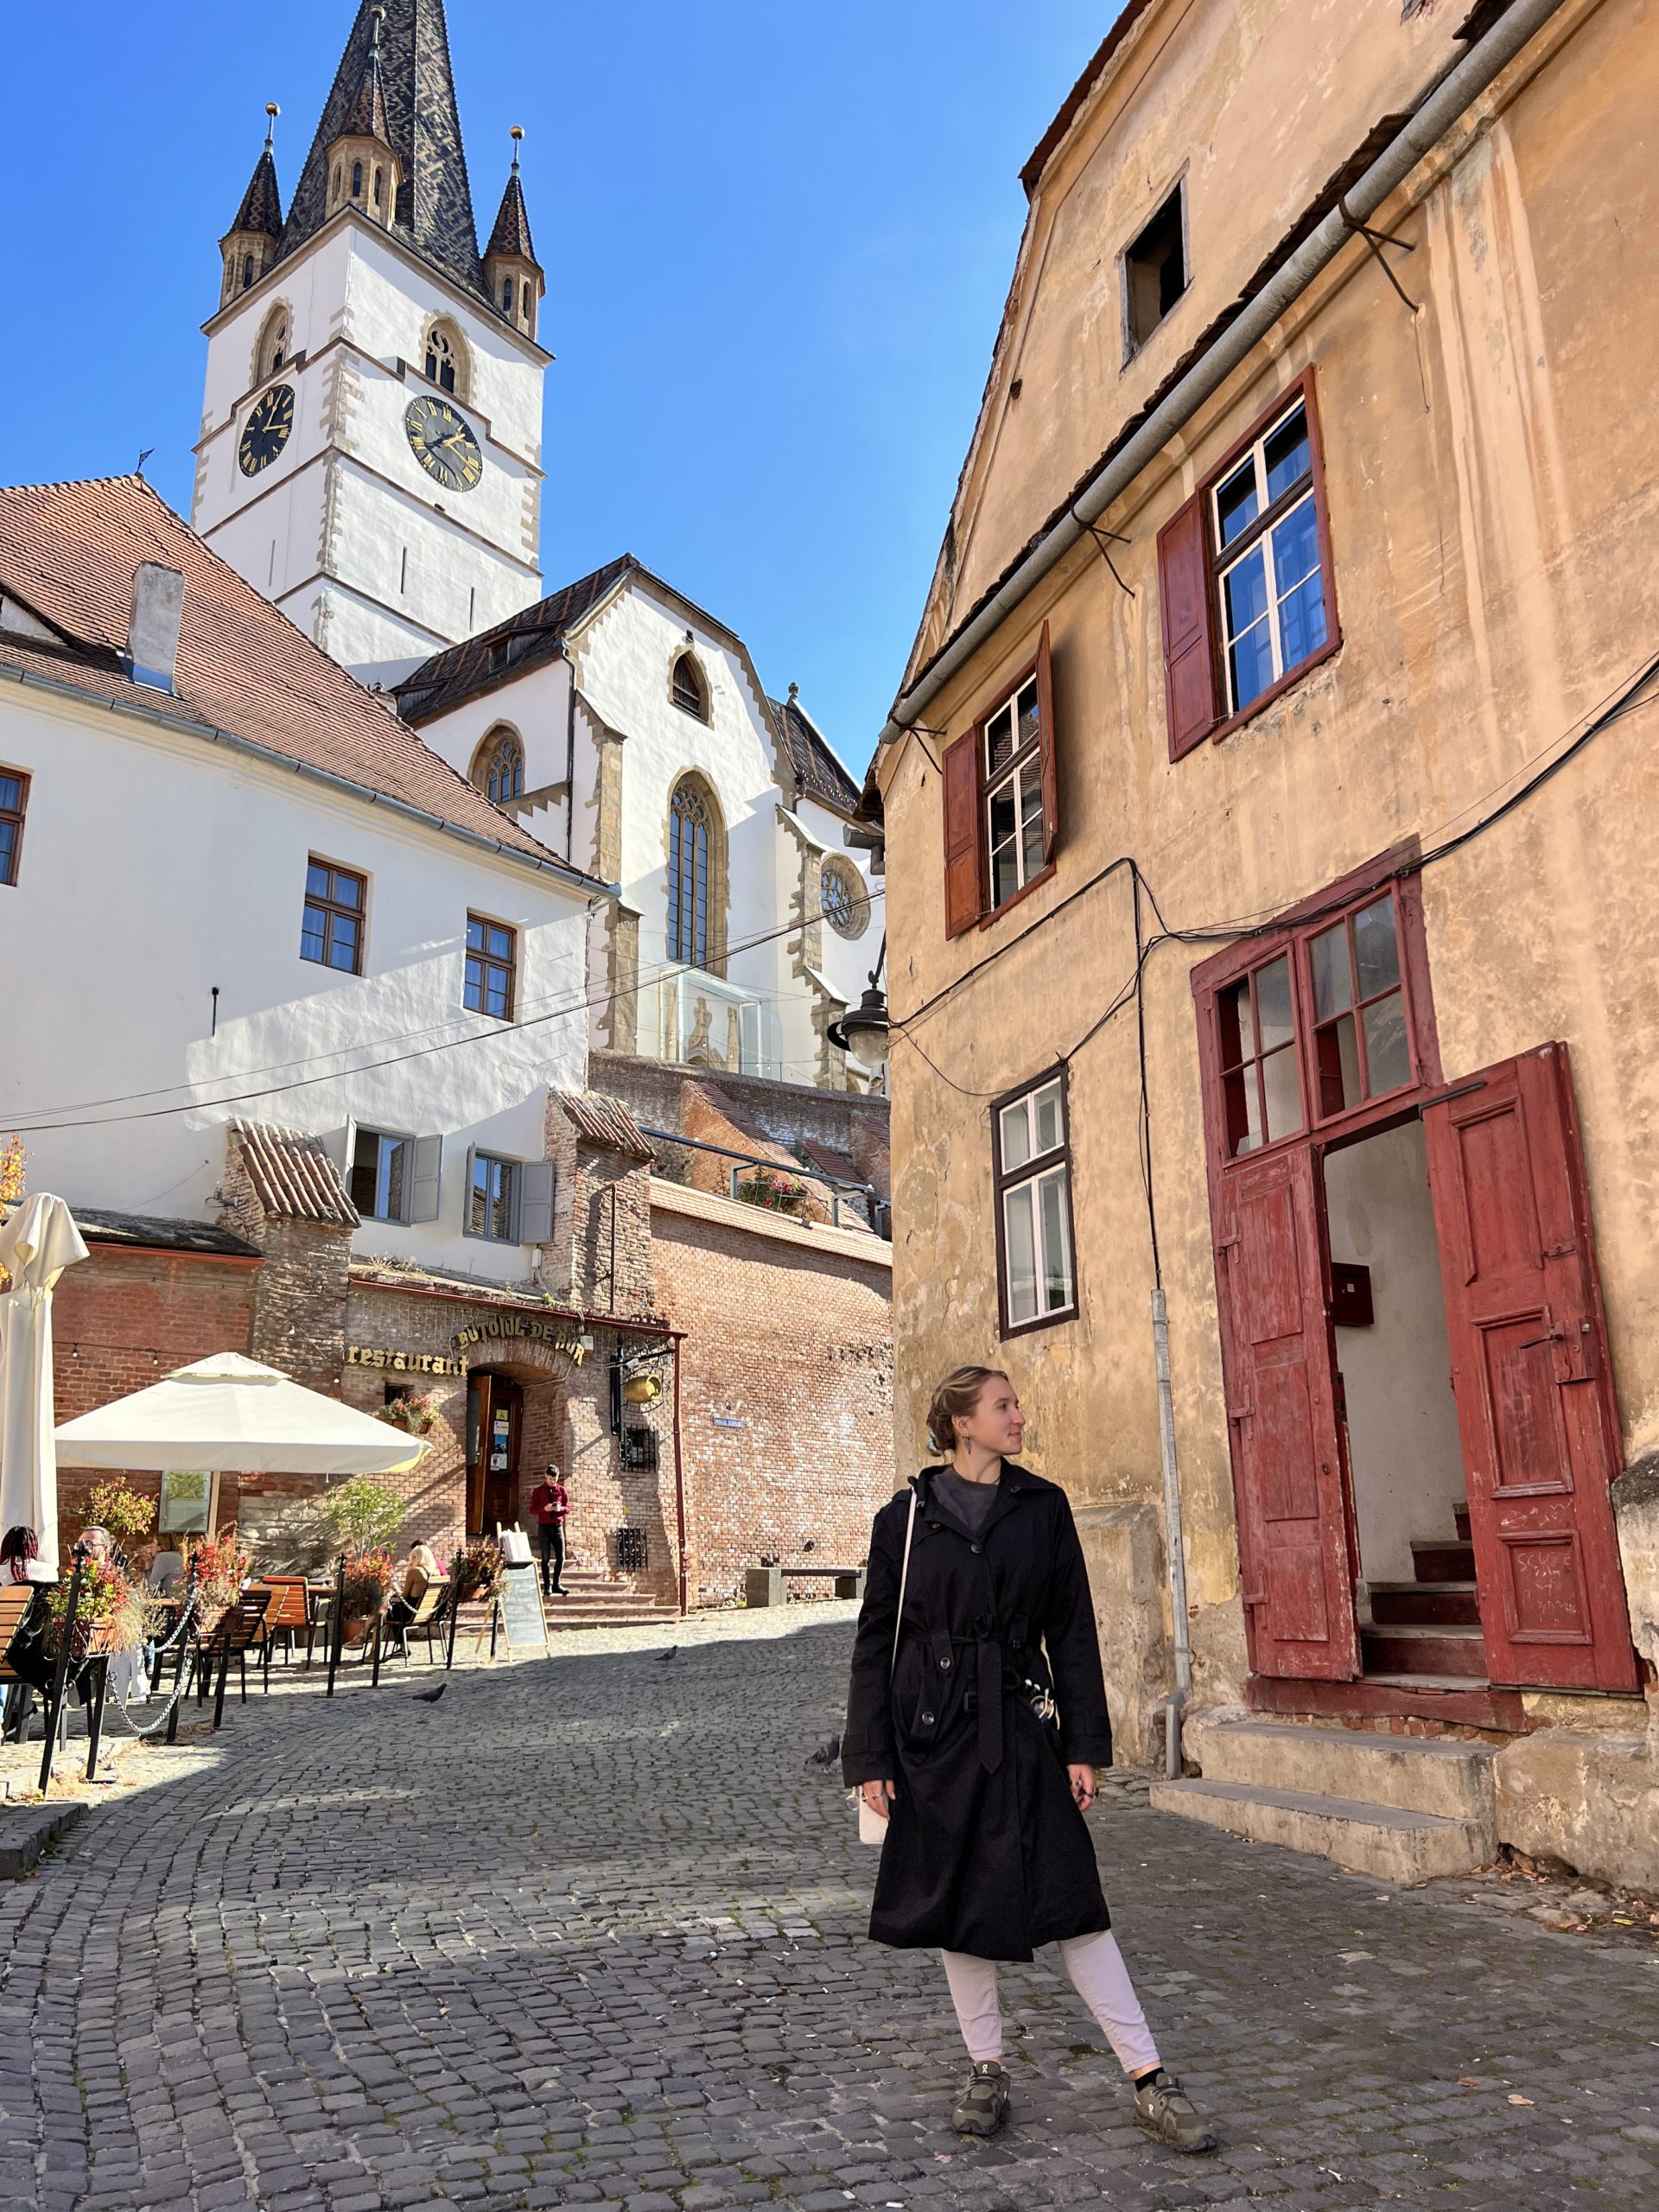 Sibiu, Romania - A charming cityscape highlighting the picturesque architecture, cultural heritage, and vibrant atmosphere of Sibiu, a popular destination in Romania; travel guide to SIbiu